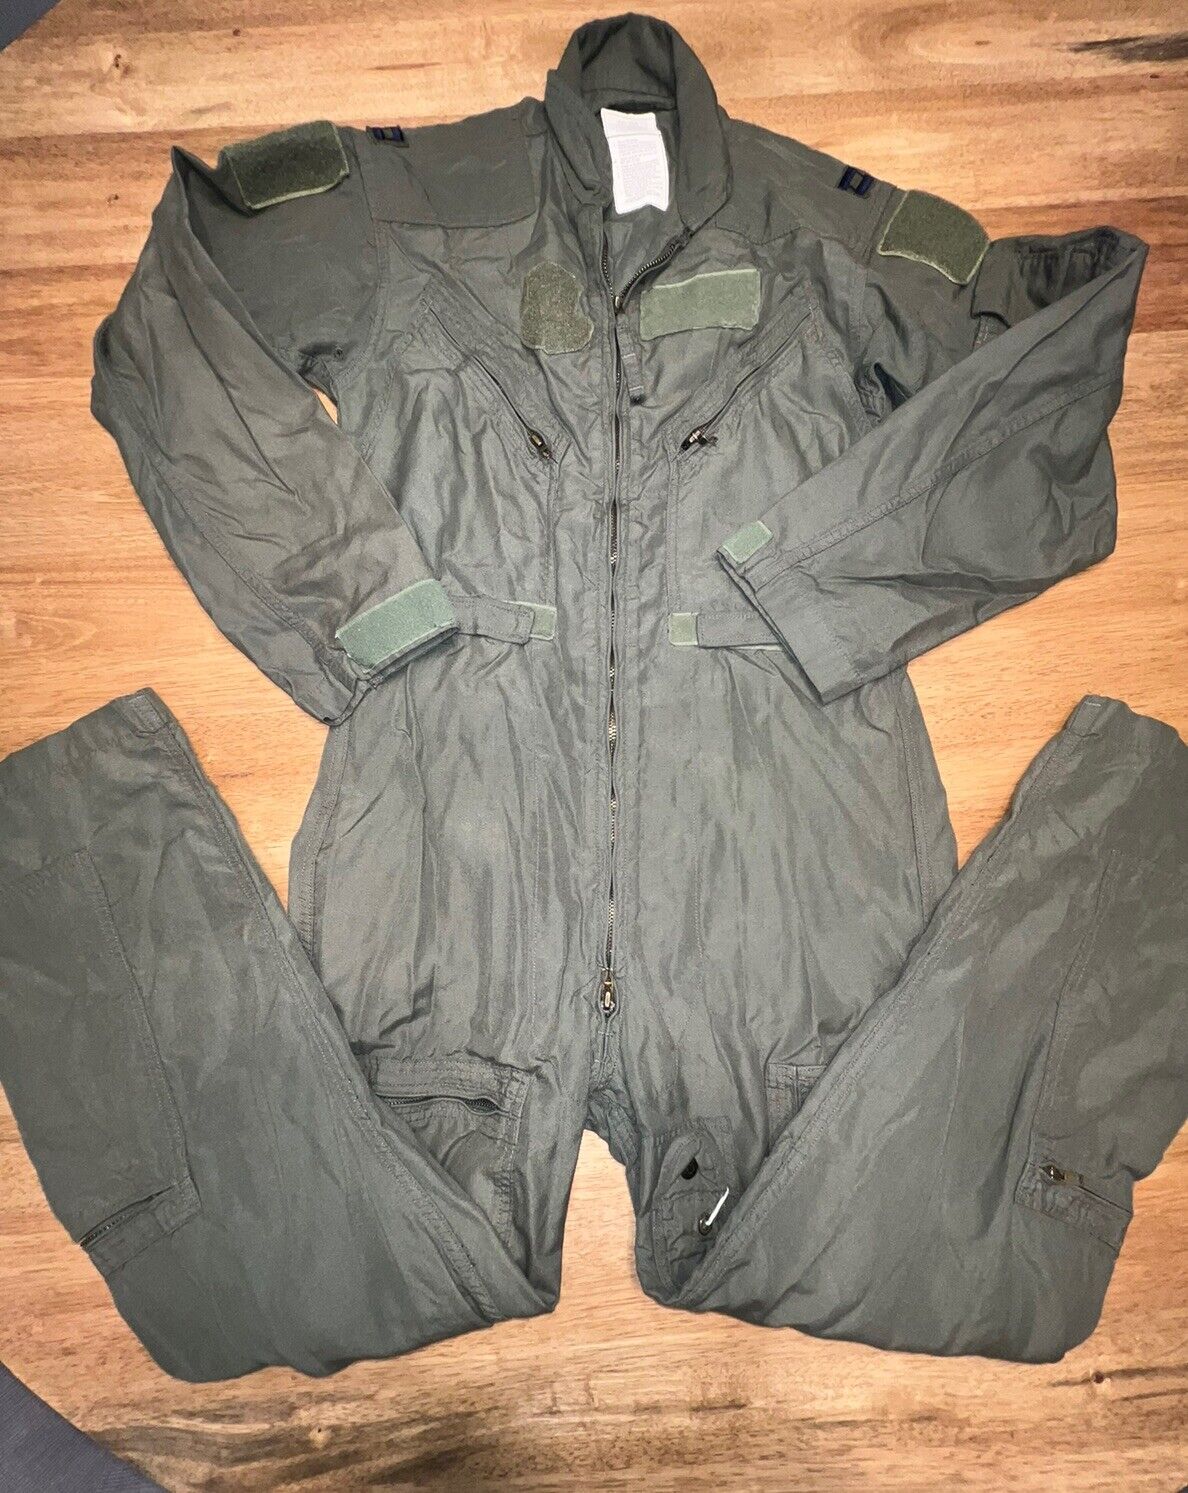 USGI Flyers Coveralls work Suit Sage Army Green Size 40R Fire Resistant CWU 27P